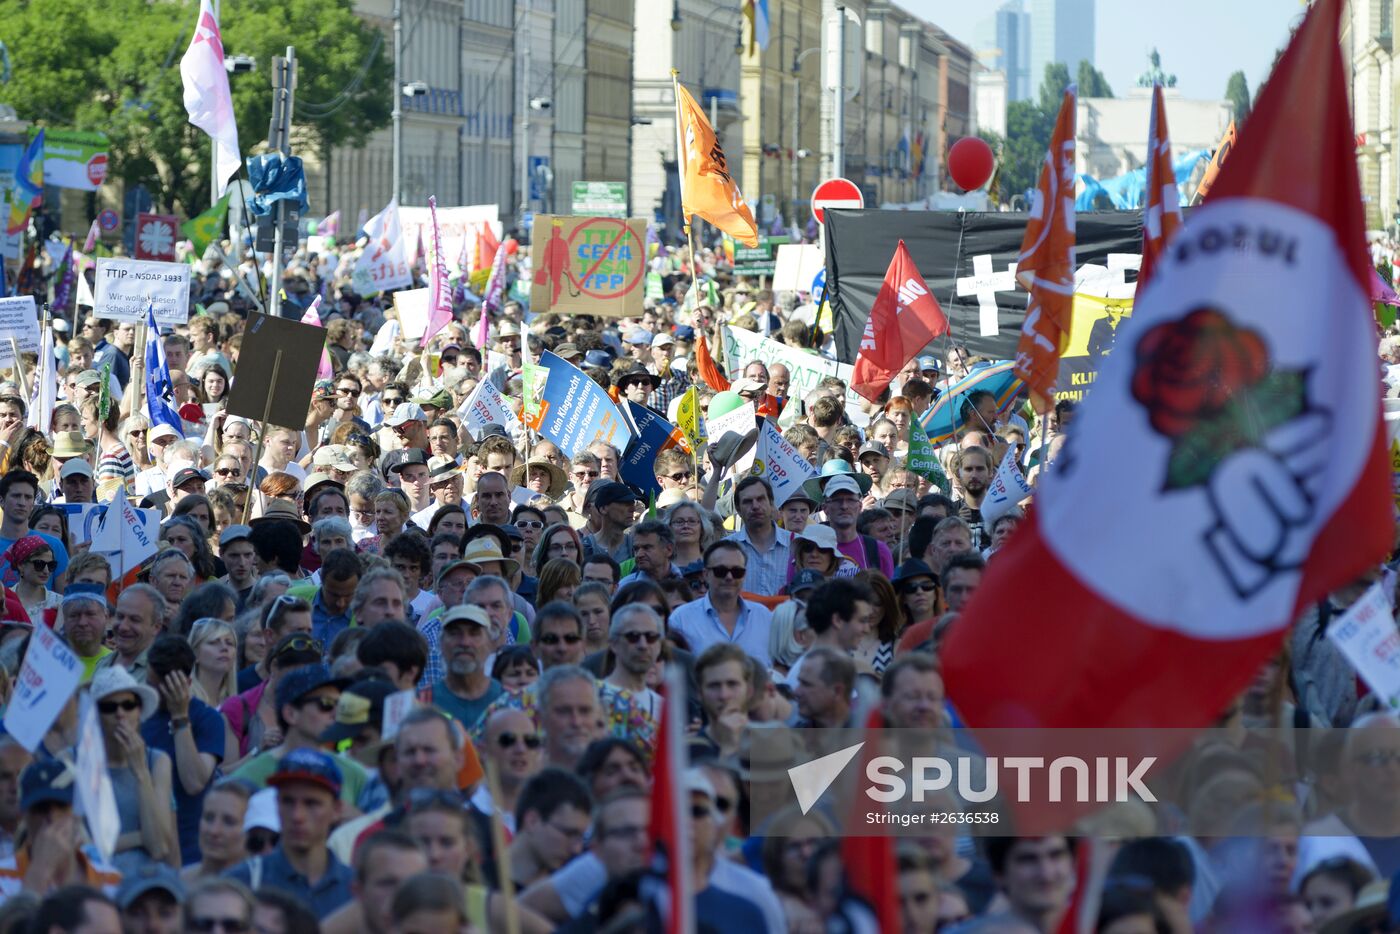 Protest in Munich ahead of G-7 summit